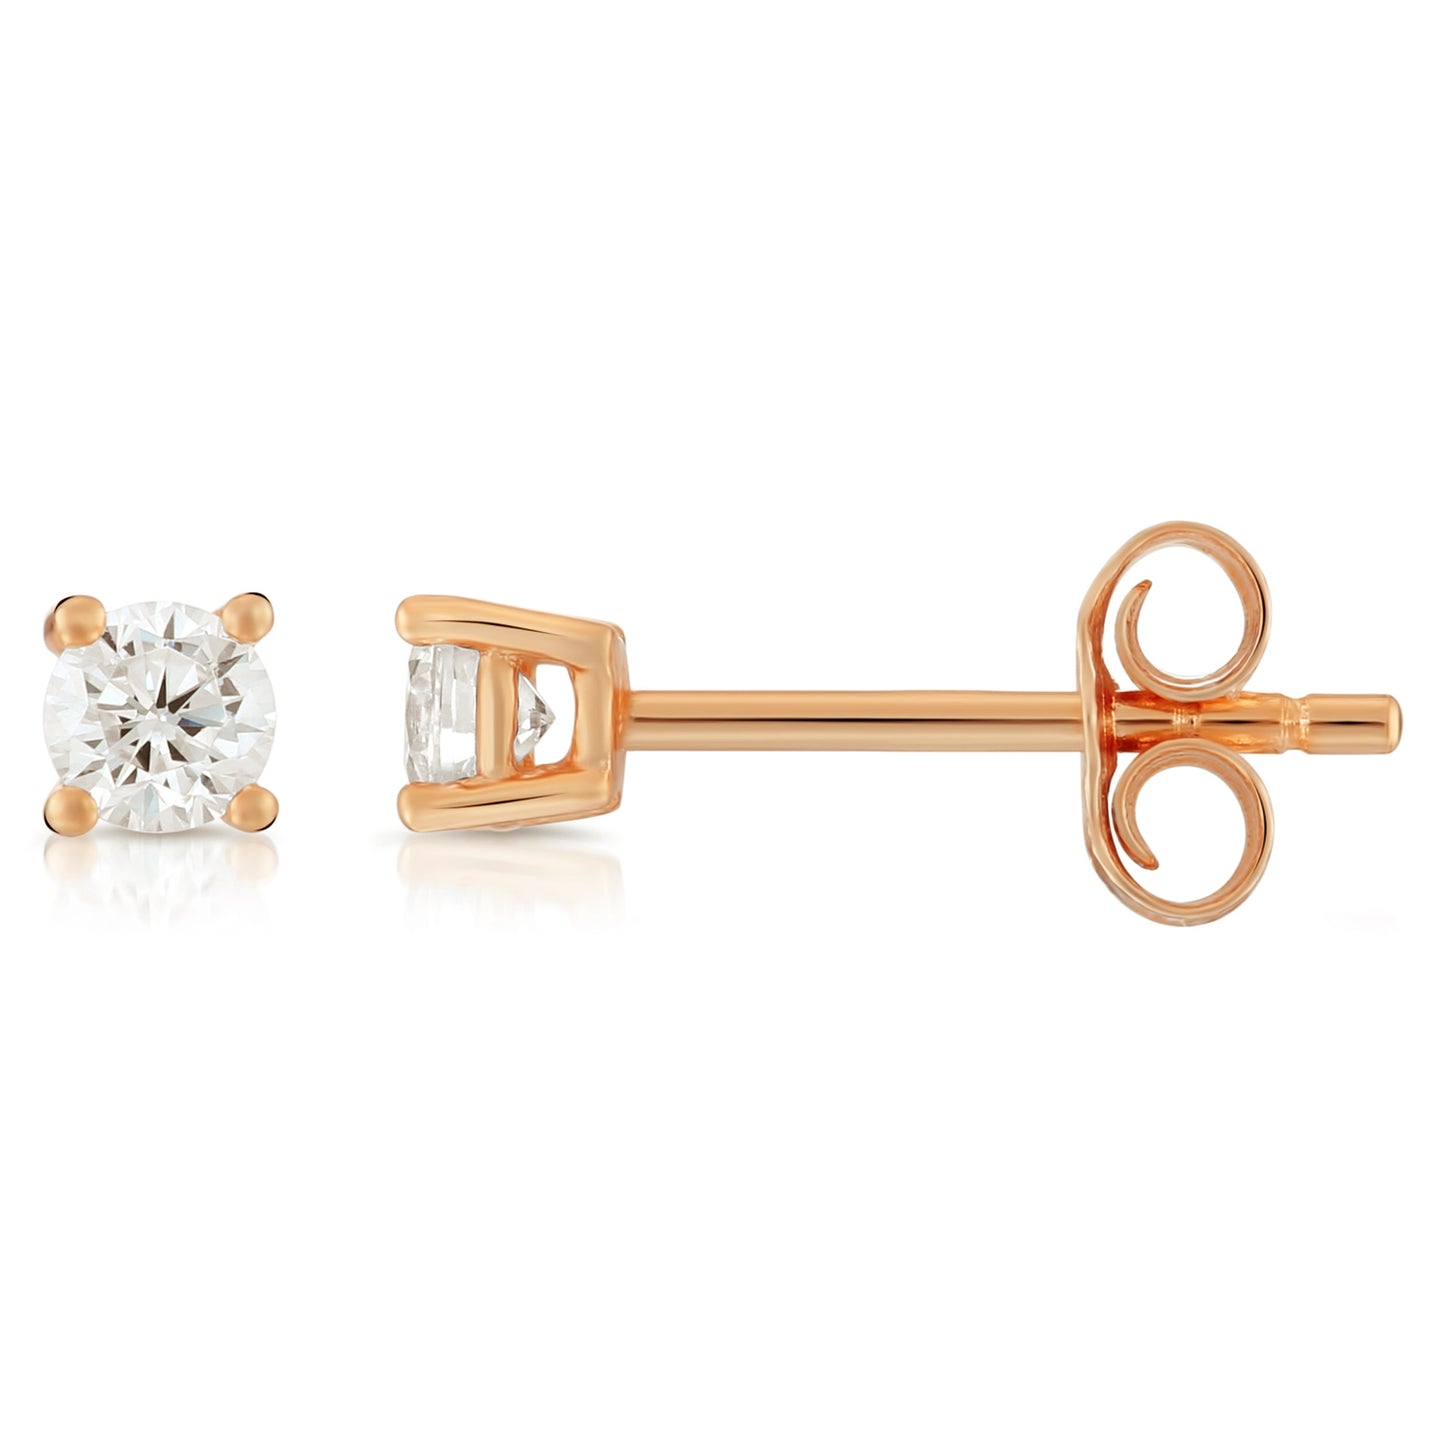 Pure Sterling Silver Stud Earrings, Rose Gold Plated